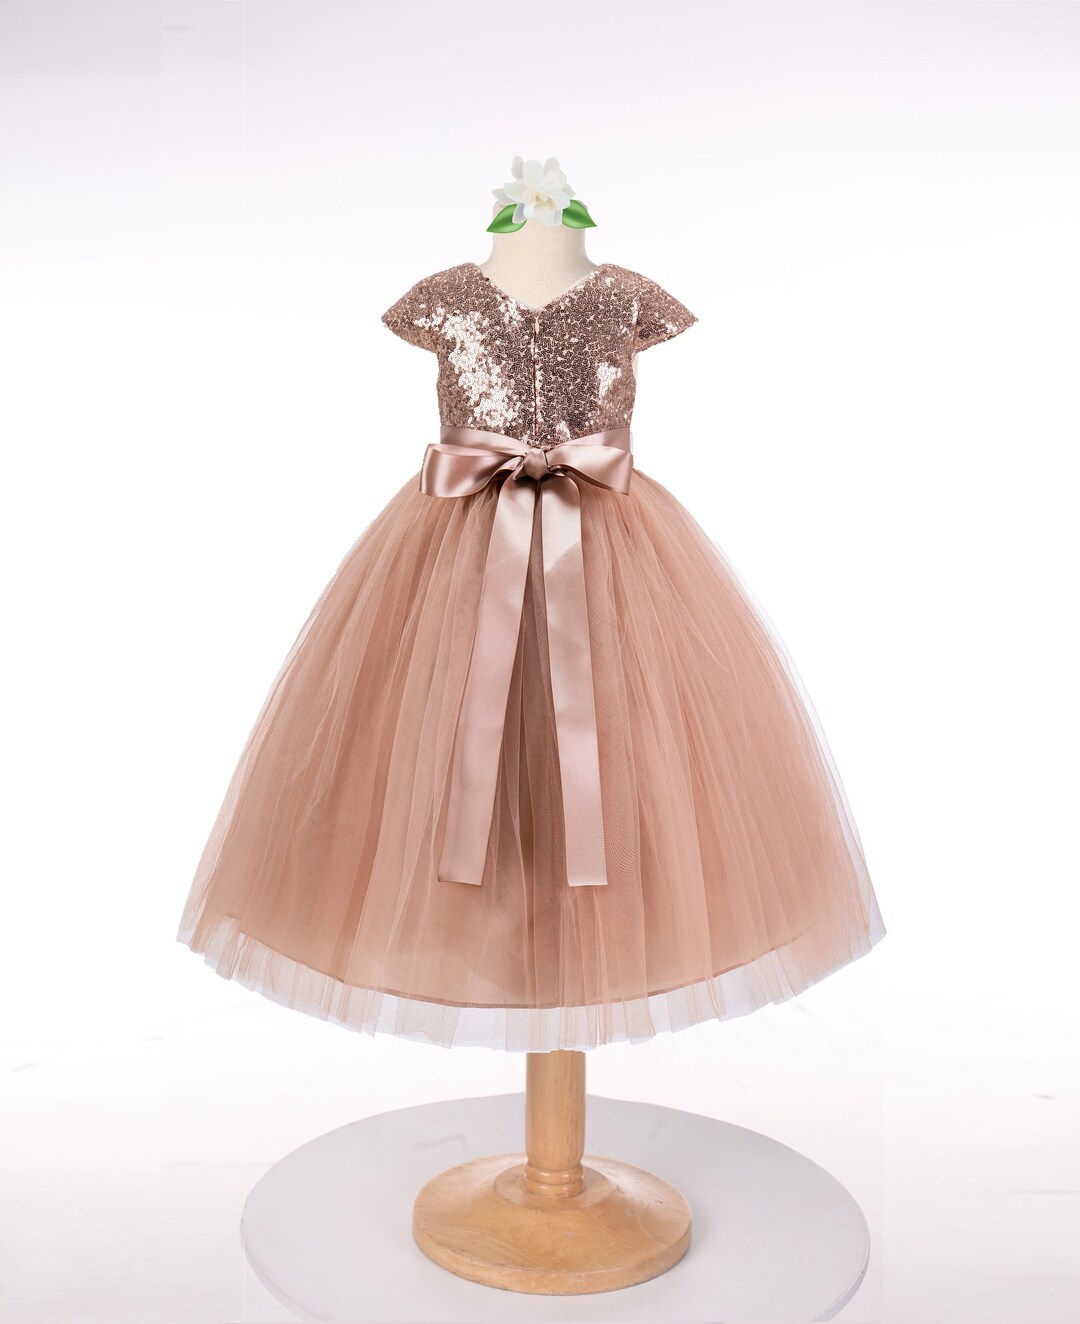 Rose Gold Sequins Mesh Flower Girl Dress With Sleeves Tulle - Etsy